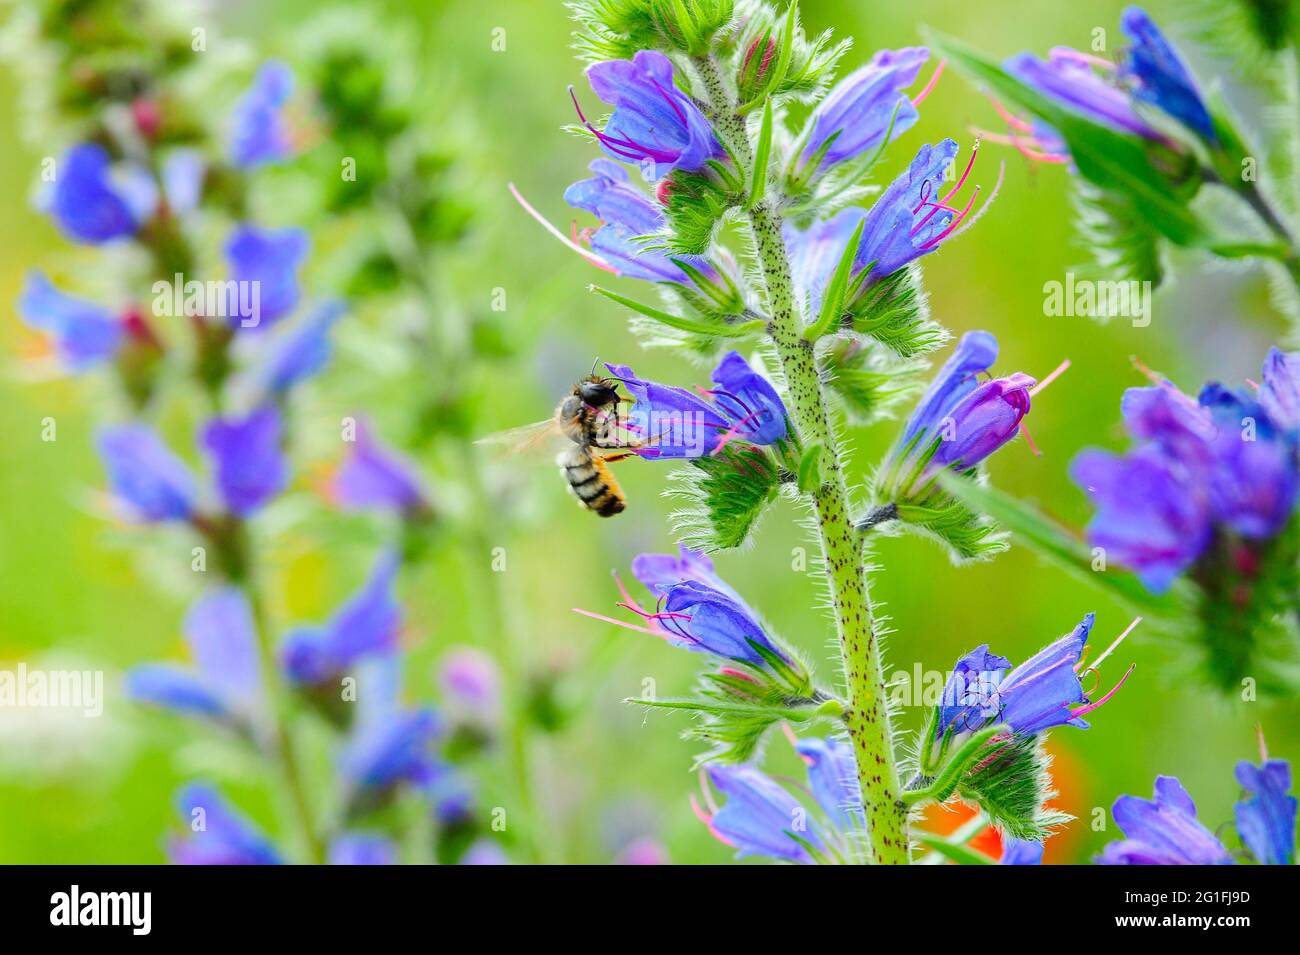 Common viper's bug (Echium vulgare) with wild bee Red mason bee (Osmia bicornis), collecting, pollinating, nature garden of the nature conservation Stock Photo